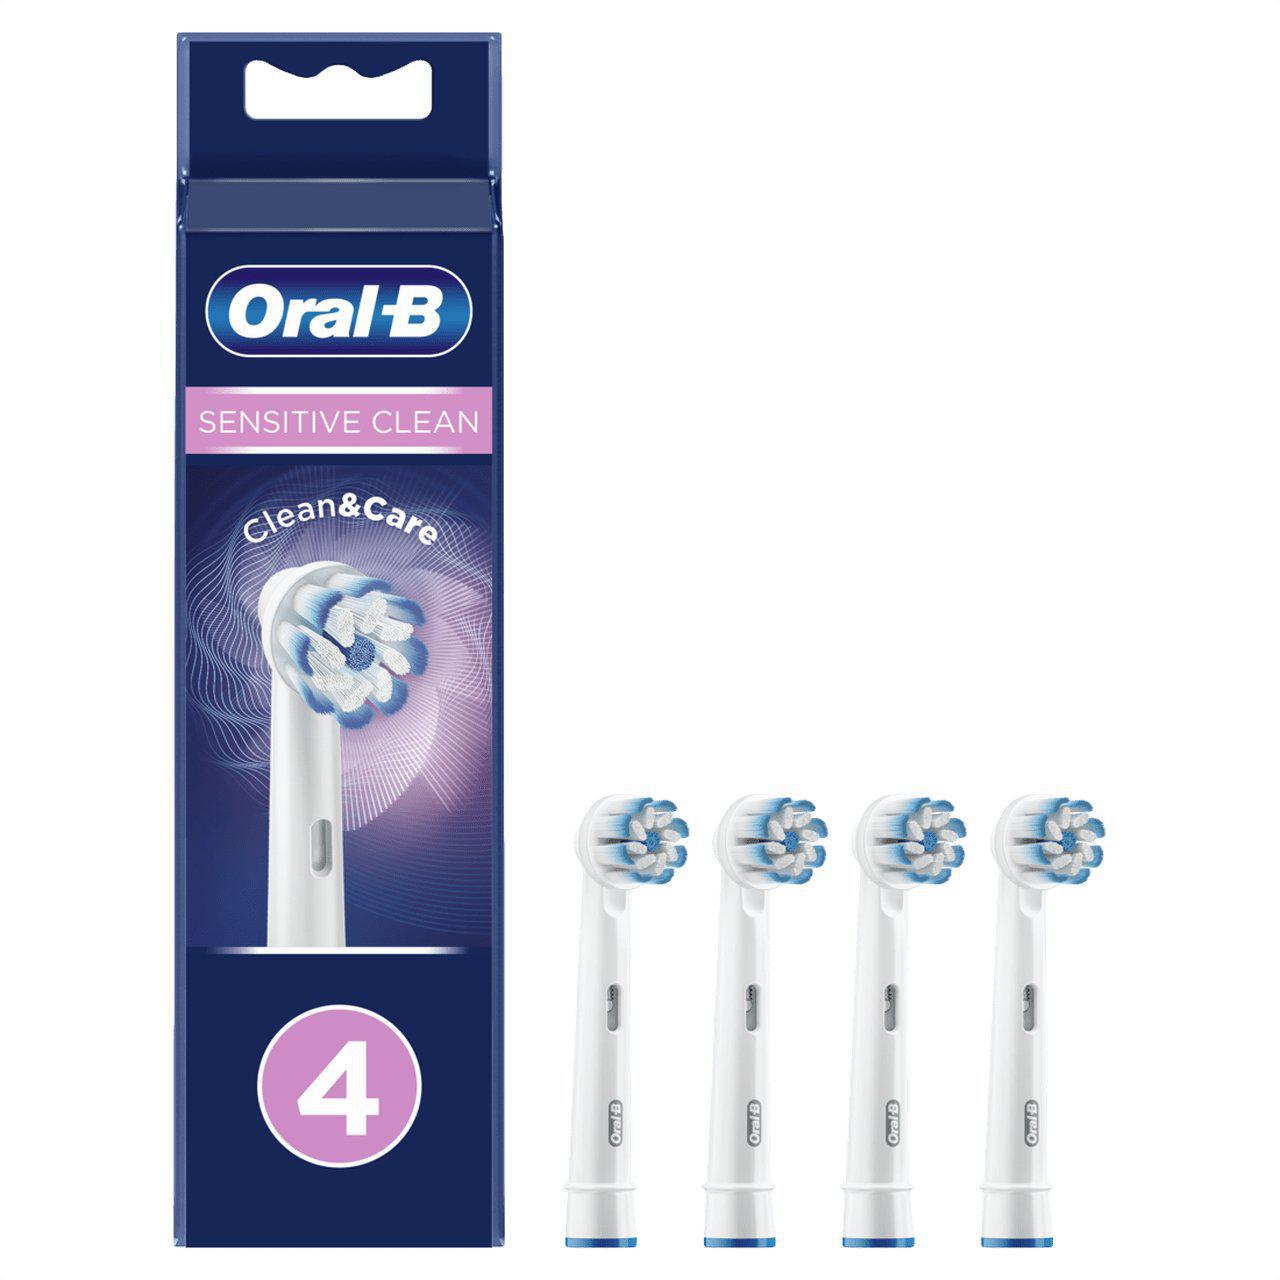 Oral-B Sensitive Clean 4pk Replacement Toothbrush Heads - Soft Bristles - Healthxpress.ie